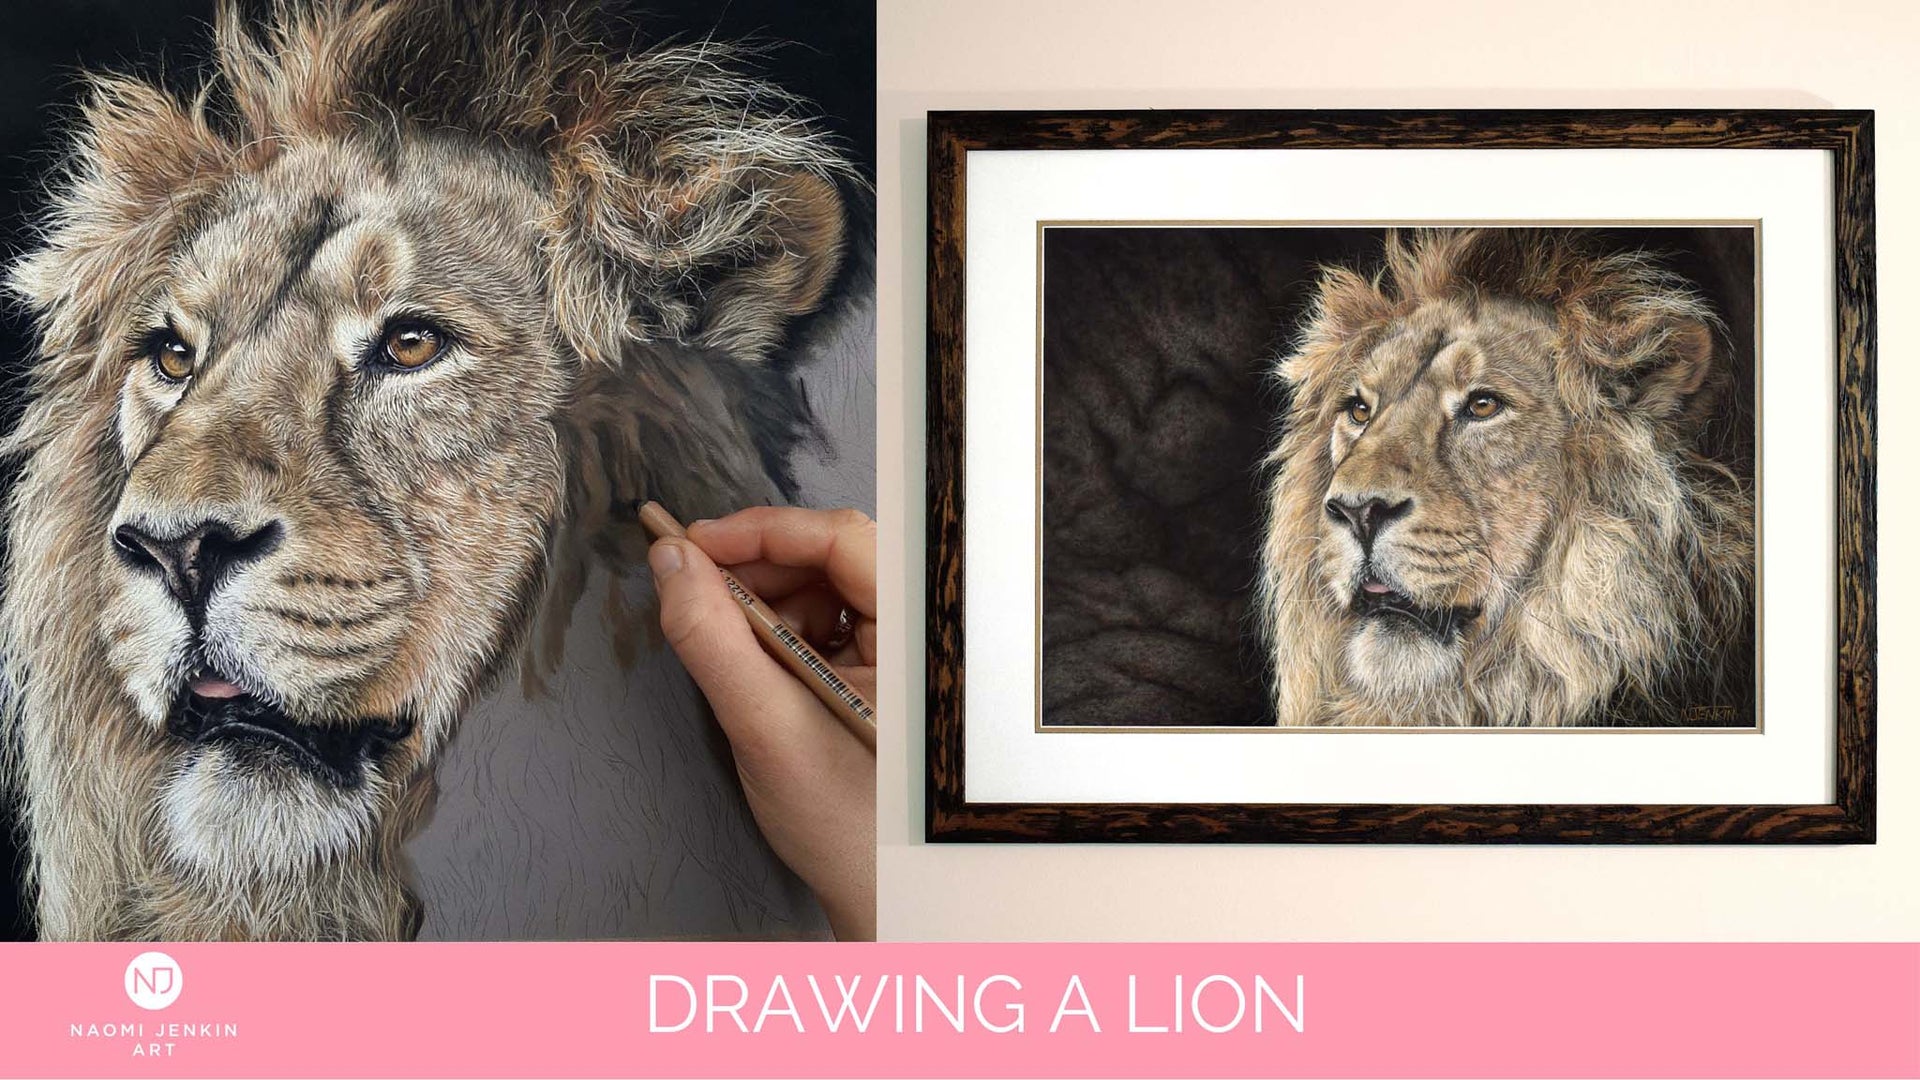 Load video: The creative process of a pastel drawing of a male lion by wildlife artist Naomi Jenkin Art.